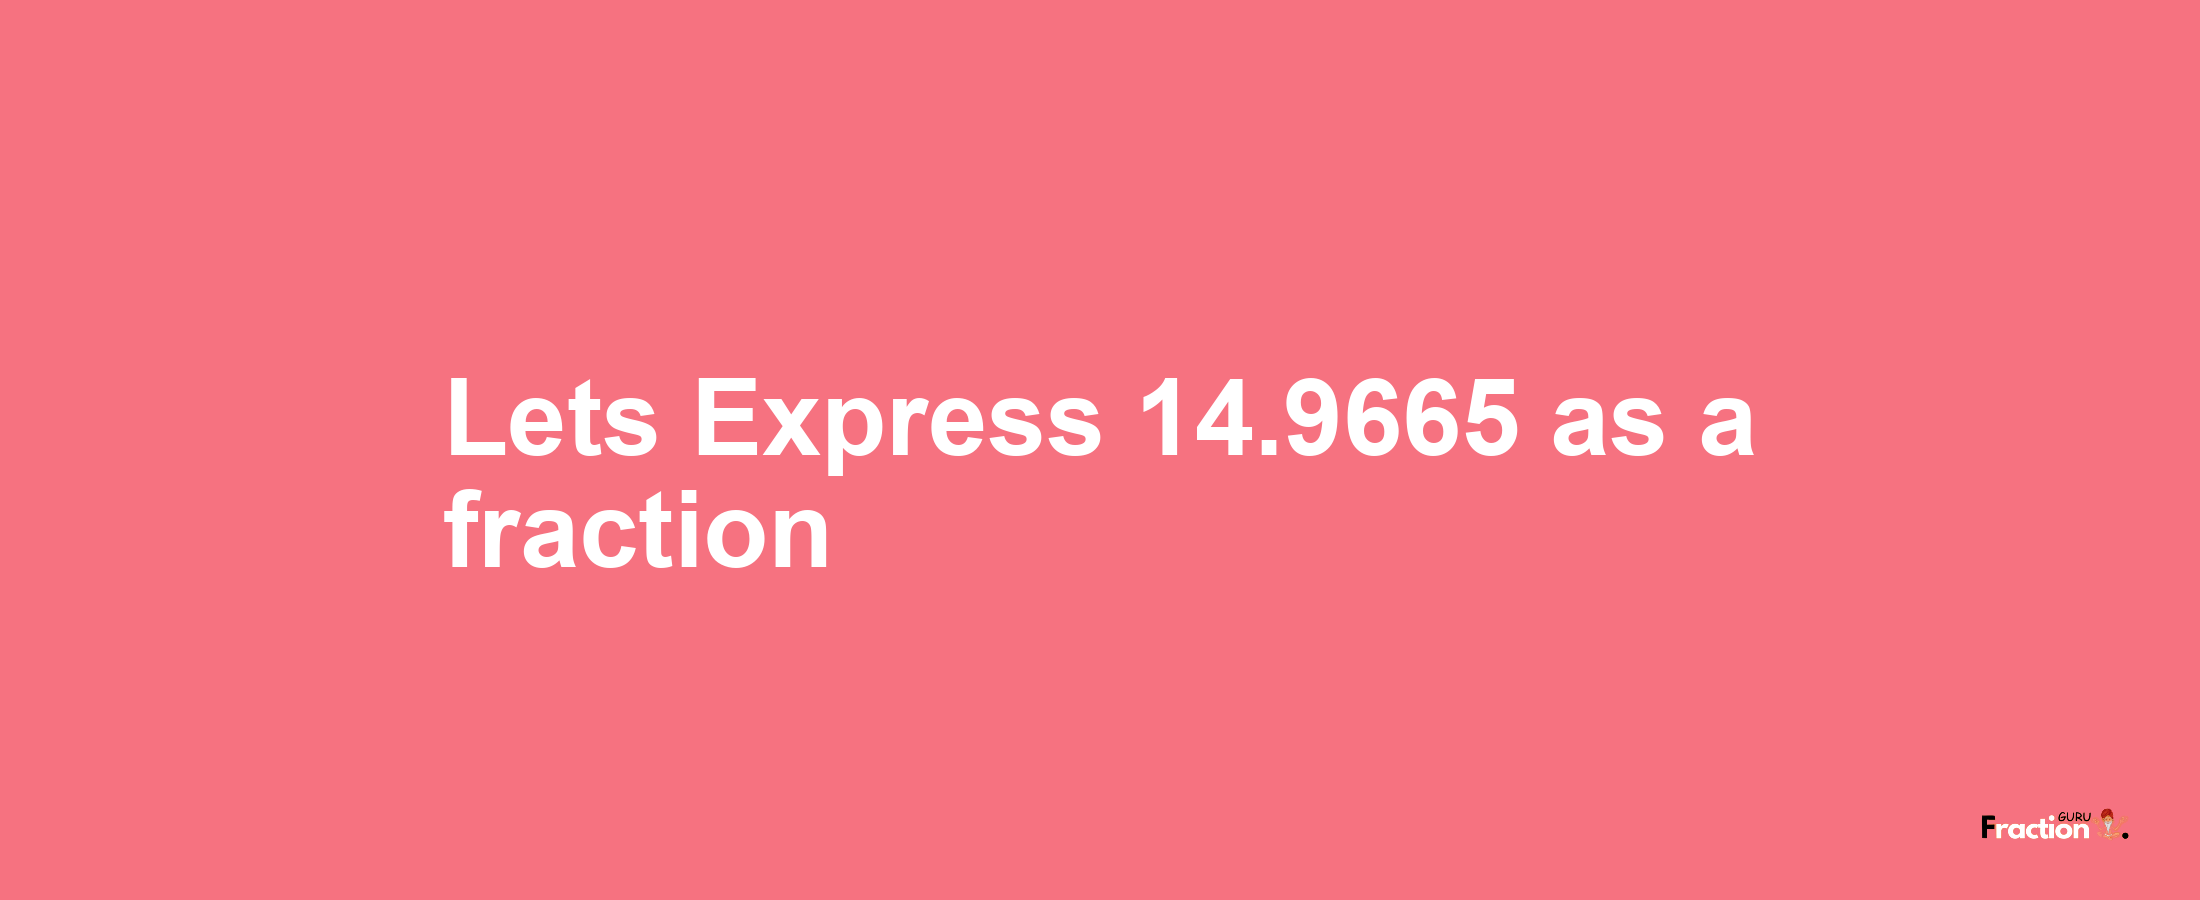 Lets Express 14.9665 as afraction